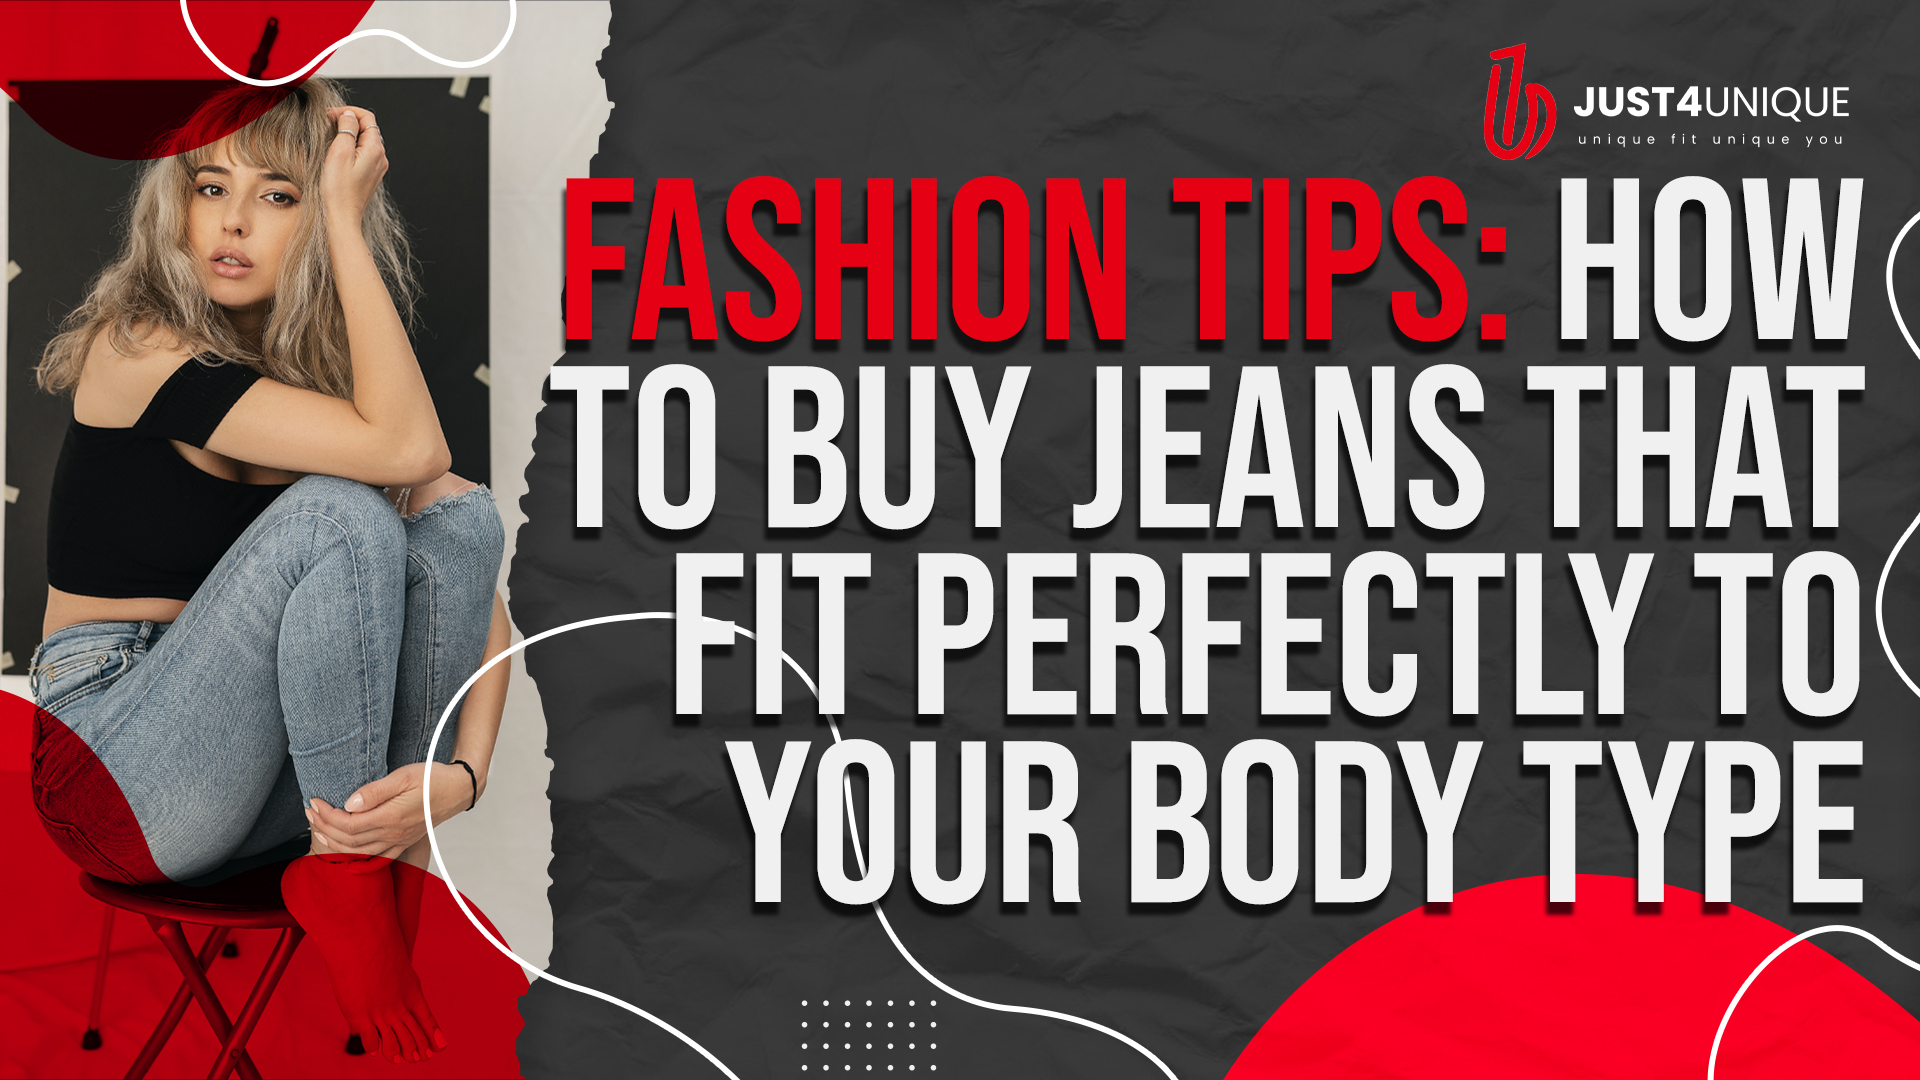 Fashion Tips How to Buy Jeans 